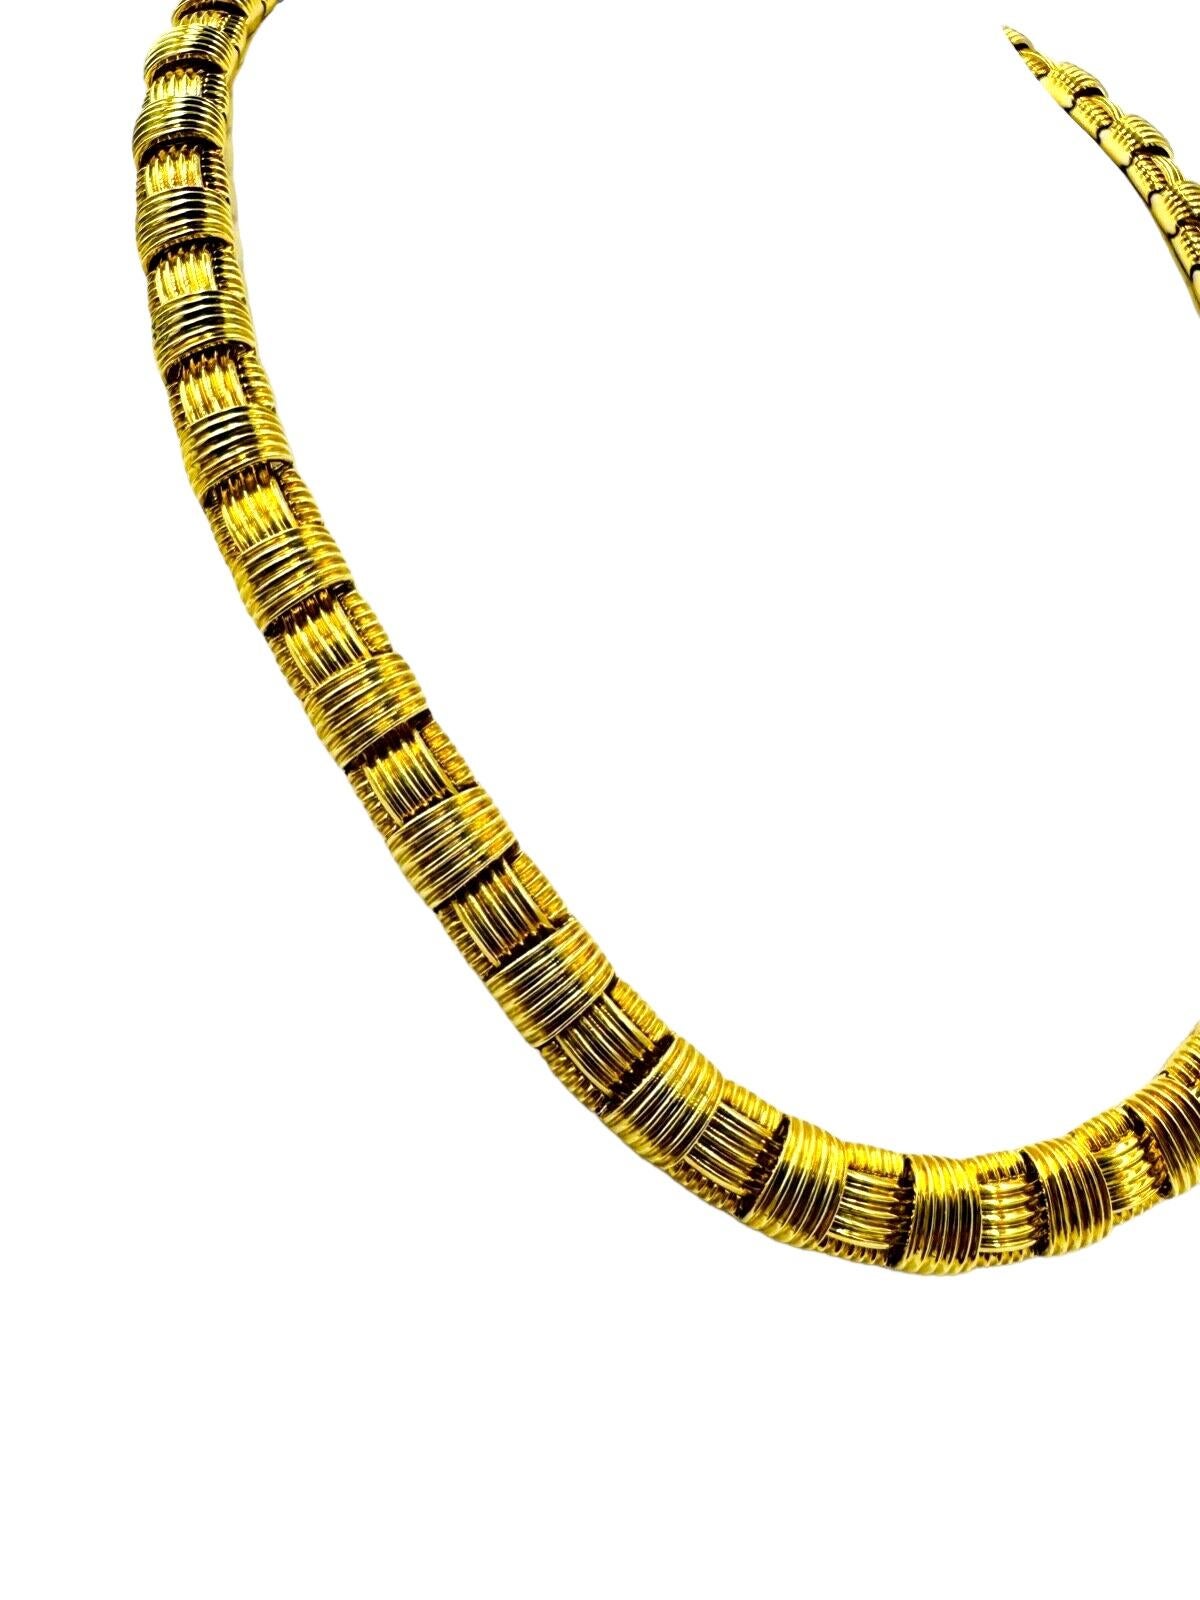 Roberto Coin fluted link yellow gold necklace.

The Roberto Coin Fluted Link Yellow Gold Necklace is a timeless piece of jewelry that exudes elegance and sophistication. Crafted from luxurious 18k yellow gold, this necklace features a unique fluted